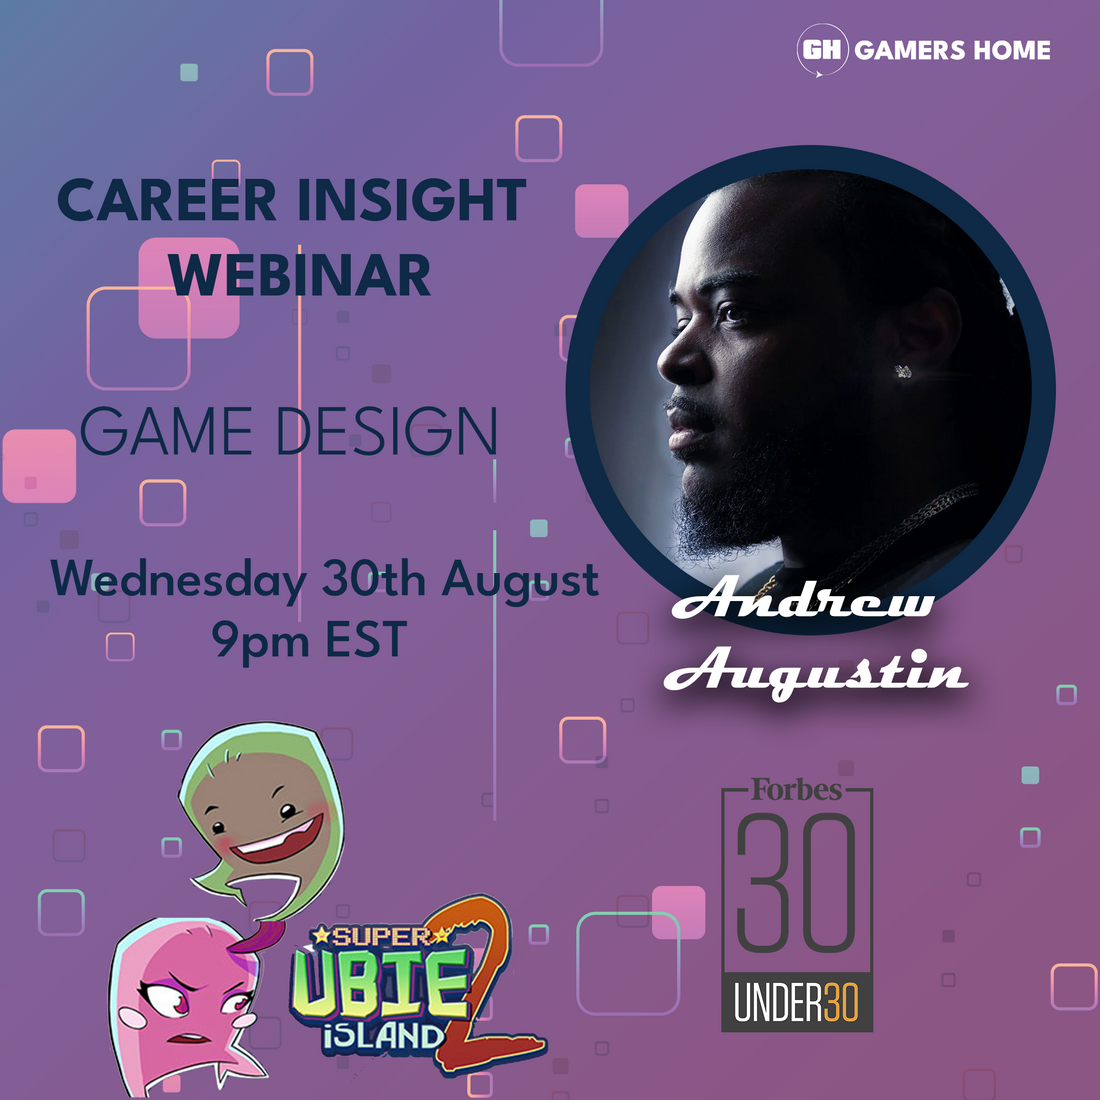 Diving into the World of Game Design and Cultural Inclusion with Andrew Augustin